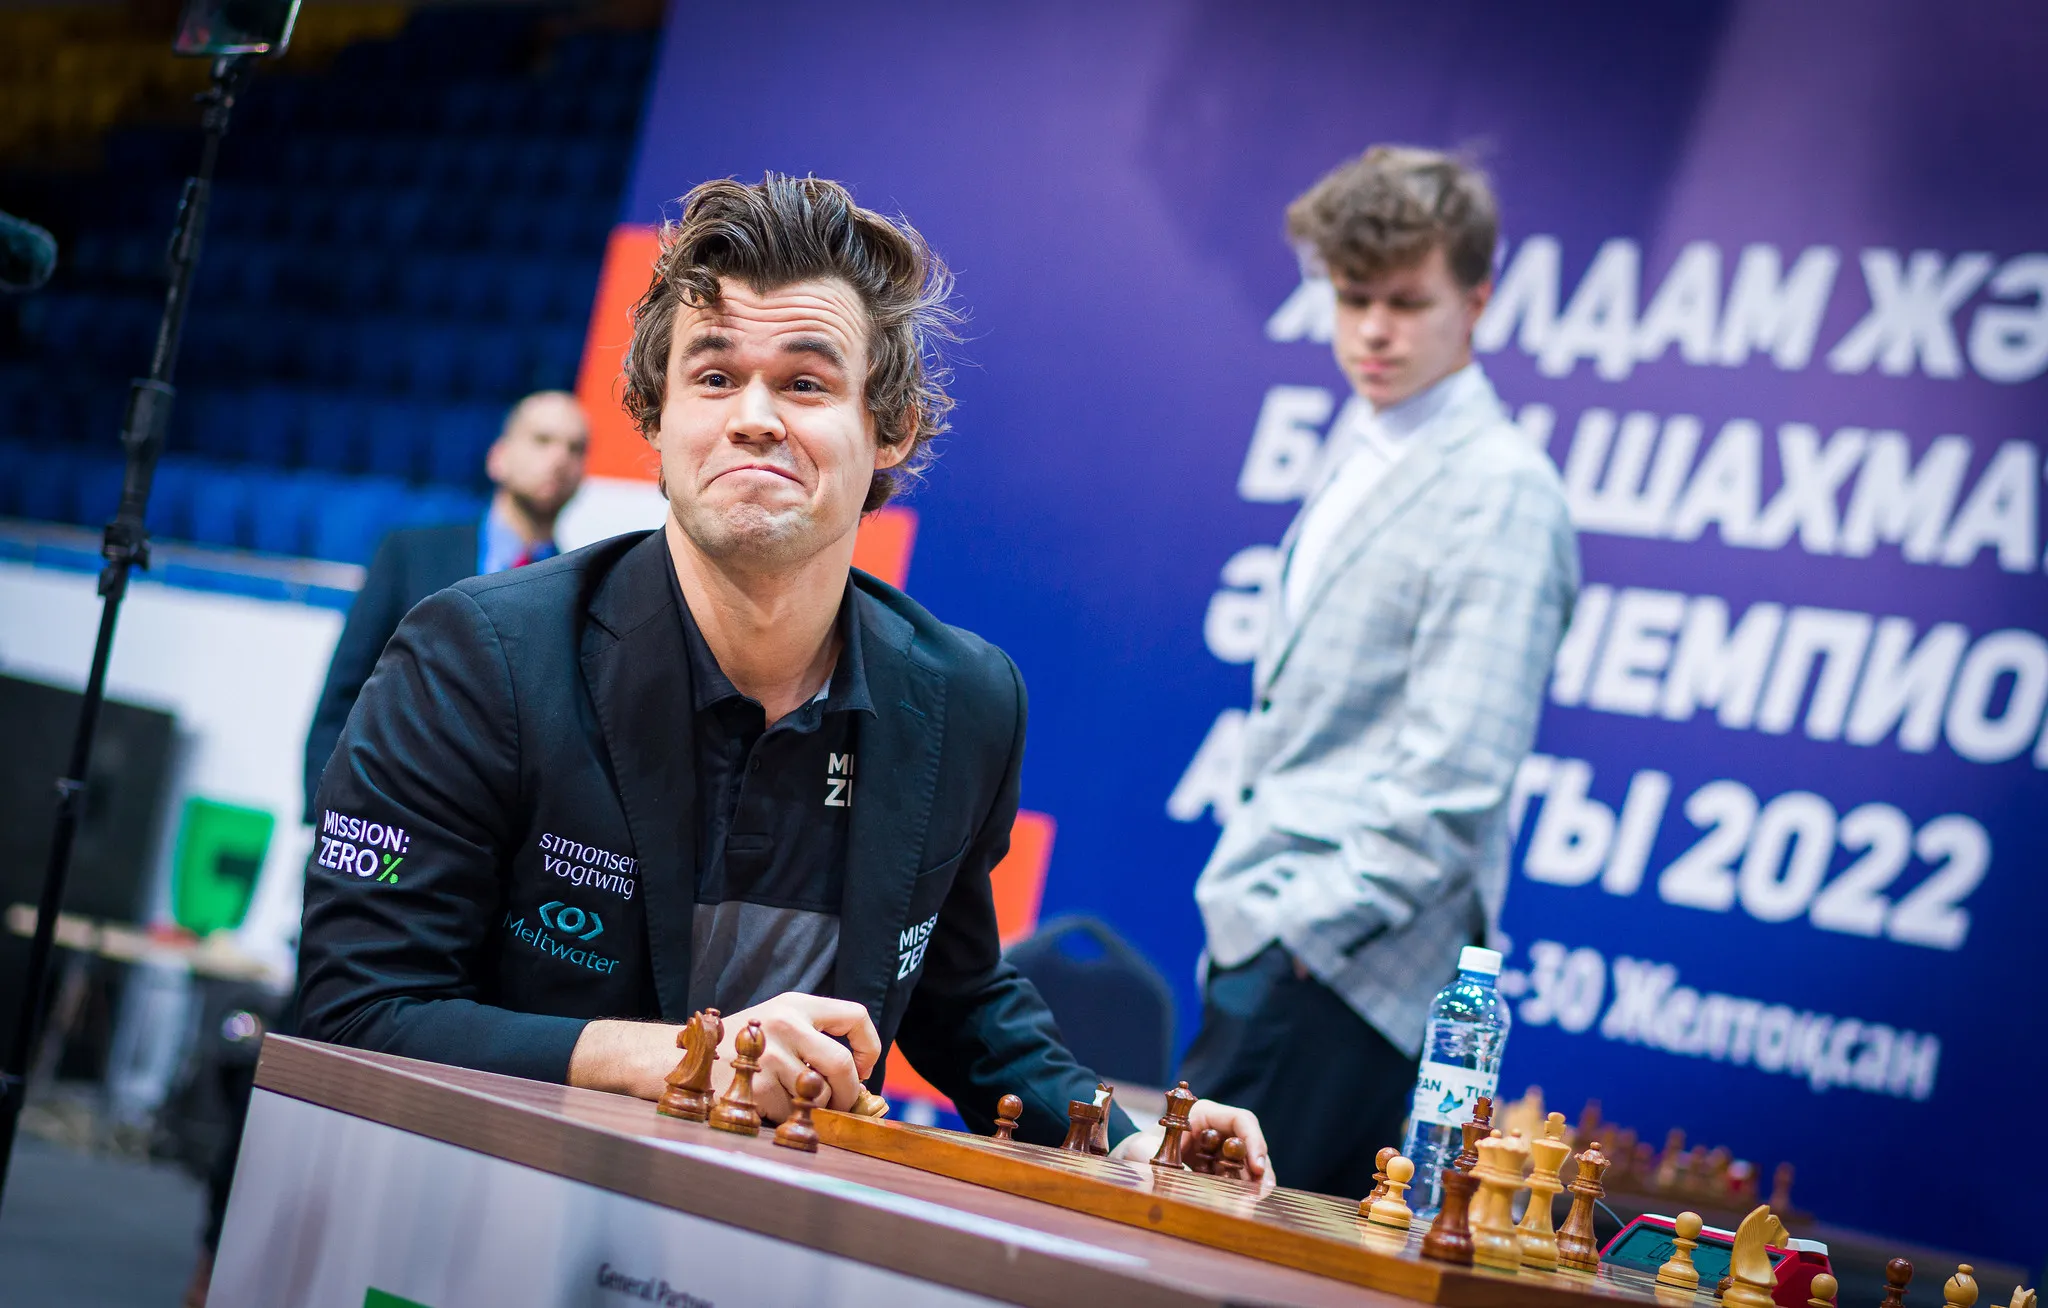 I'm a chess grandmaster who's made over $280,000 this year from esports  tournaments. Here's what my days are like as the highest-rated blitz player  in the world.